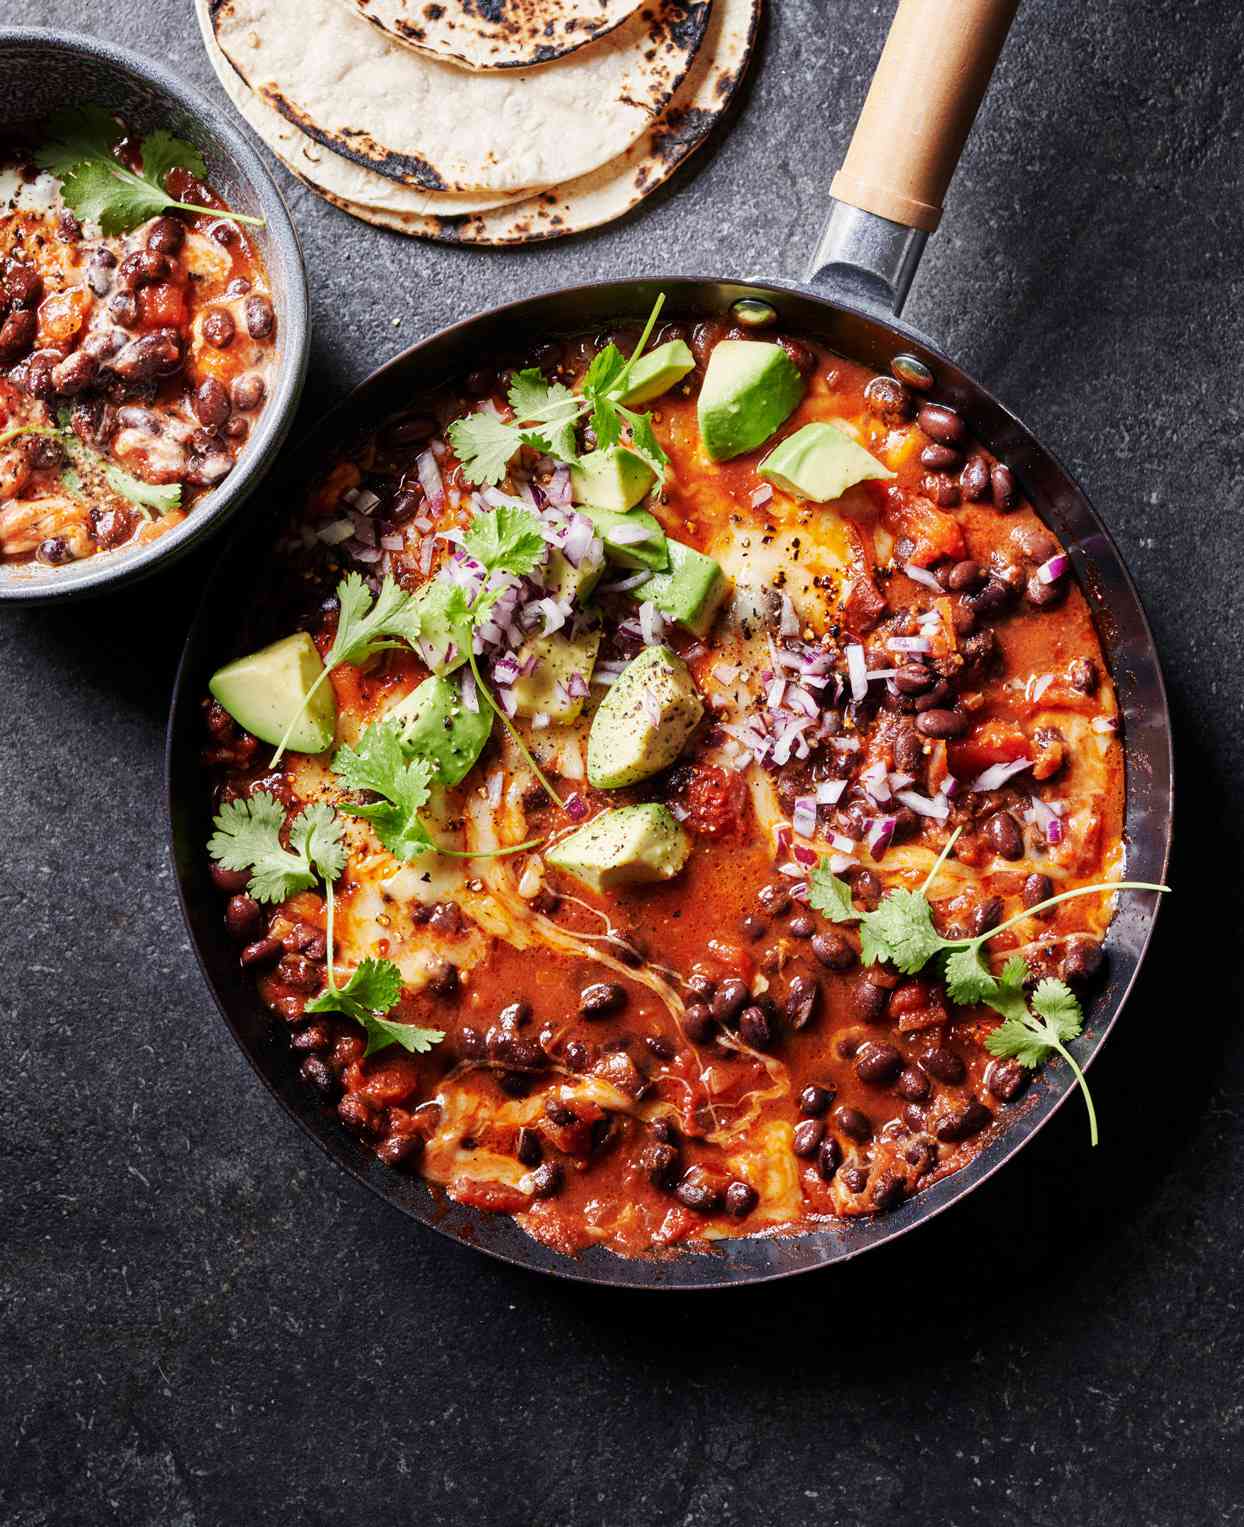 weeknight vegetarian chili served with tortillas